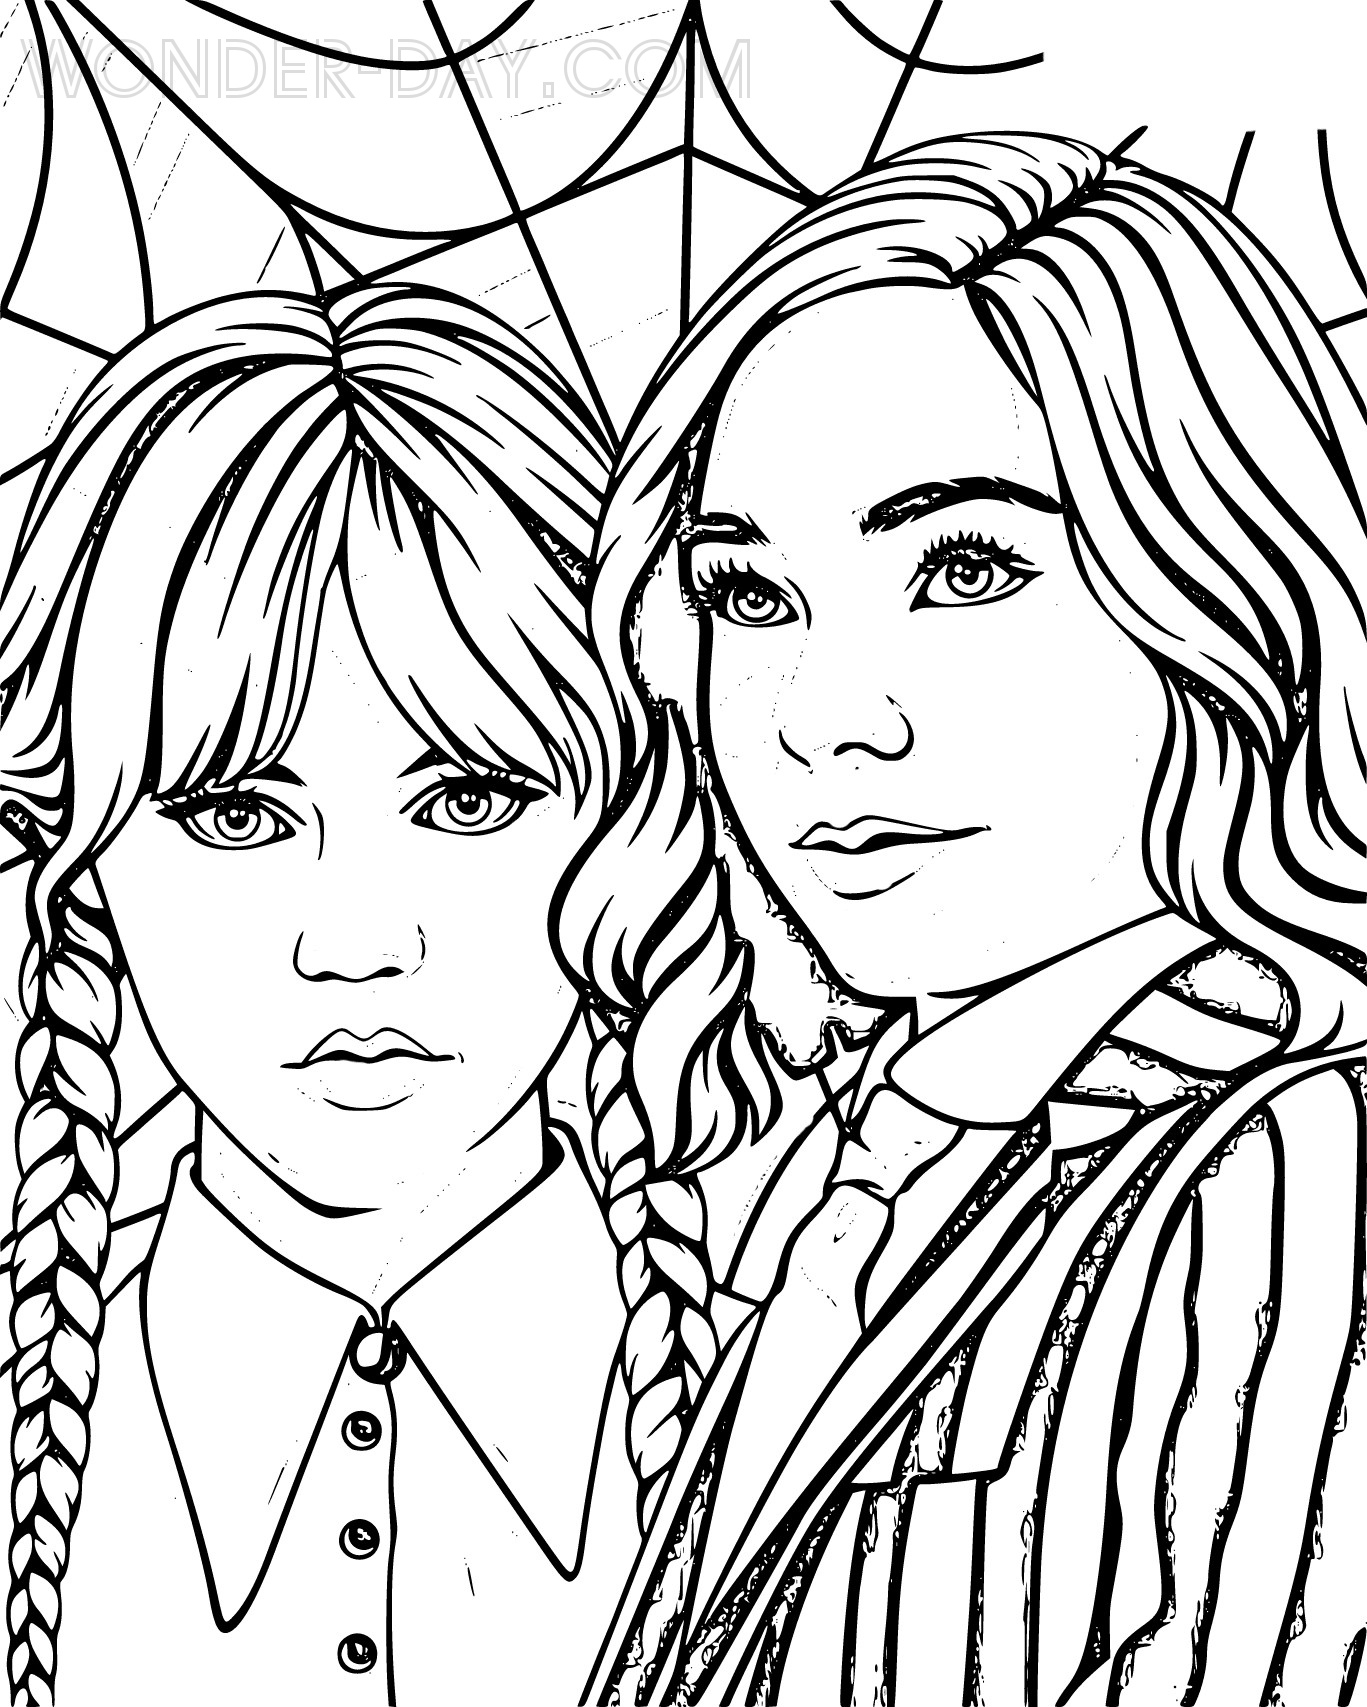 Wednesday Addams Coloring Pages | 22 Coloring Pages